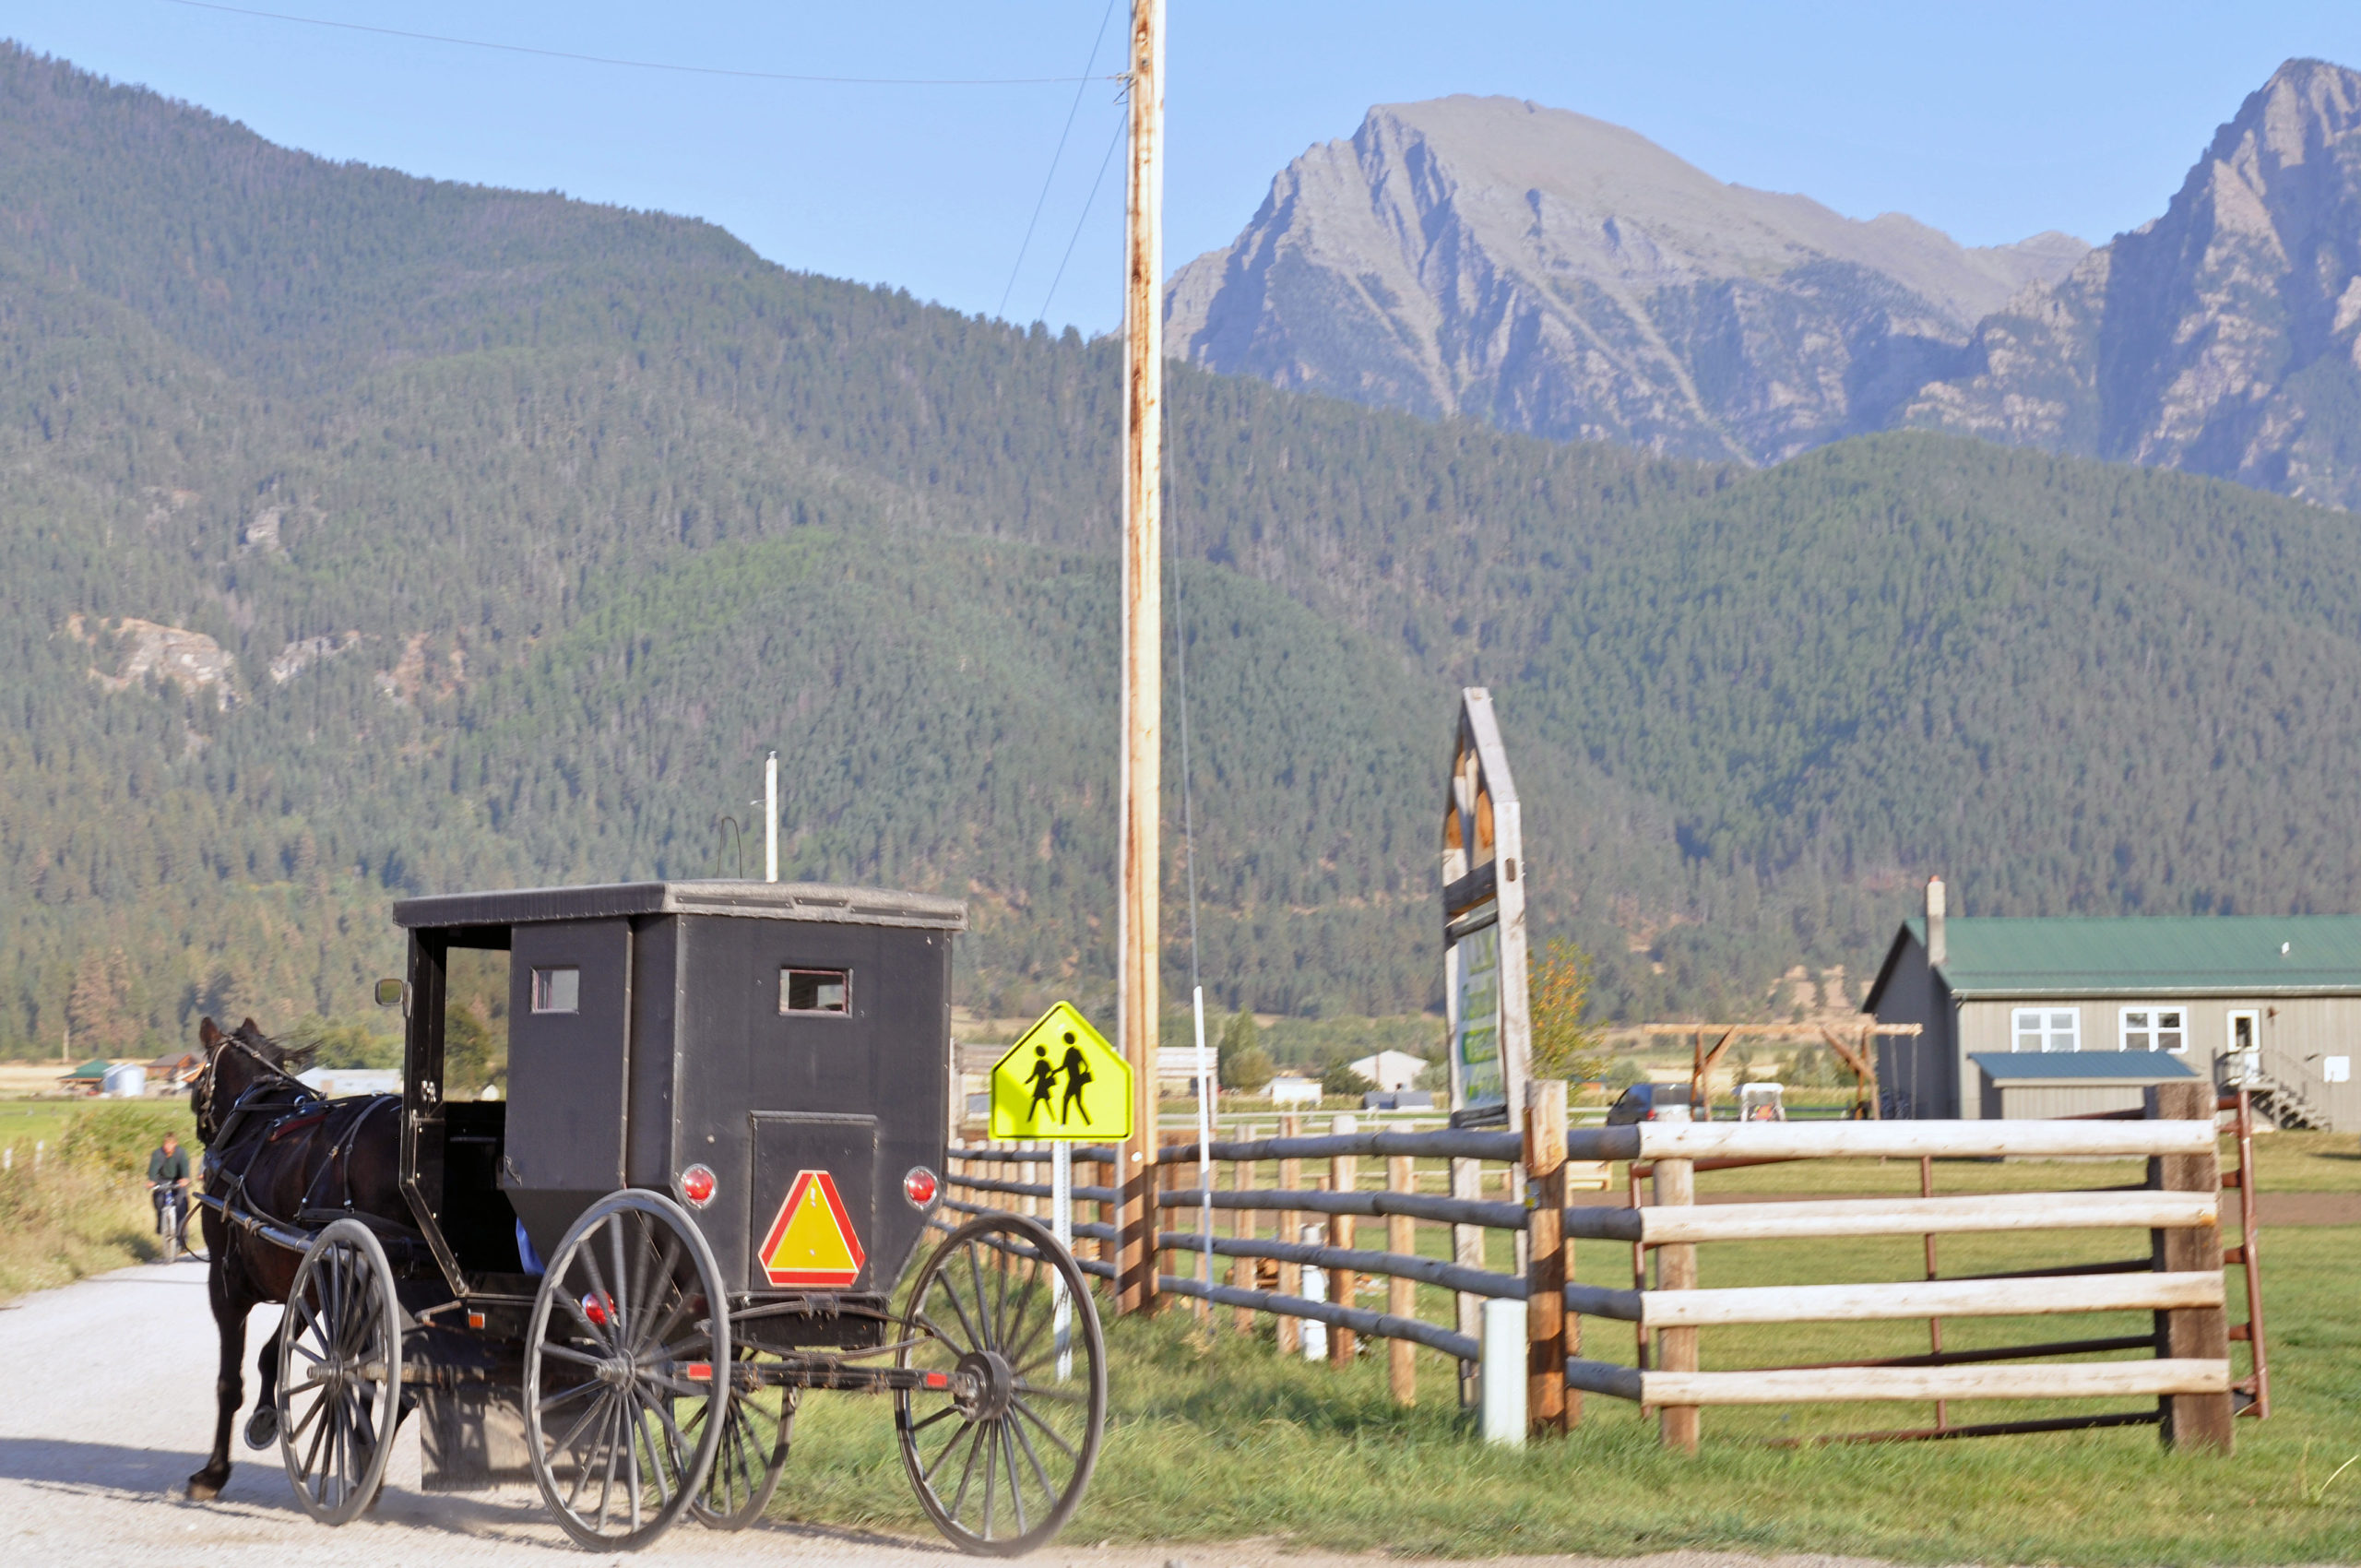 This Amish community in Montana is an example of how far they settled from their Pennsylvania roots.